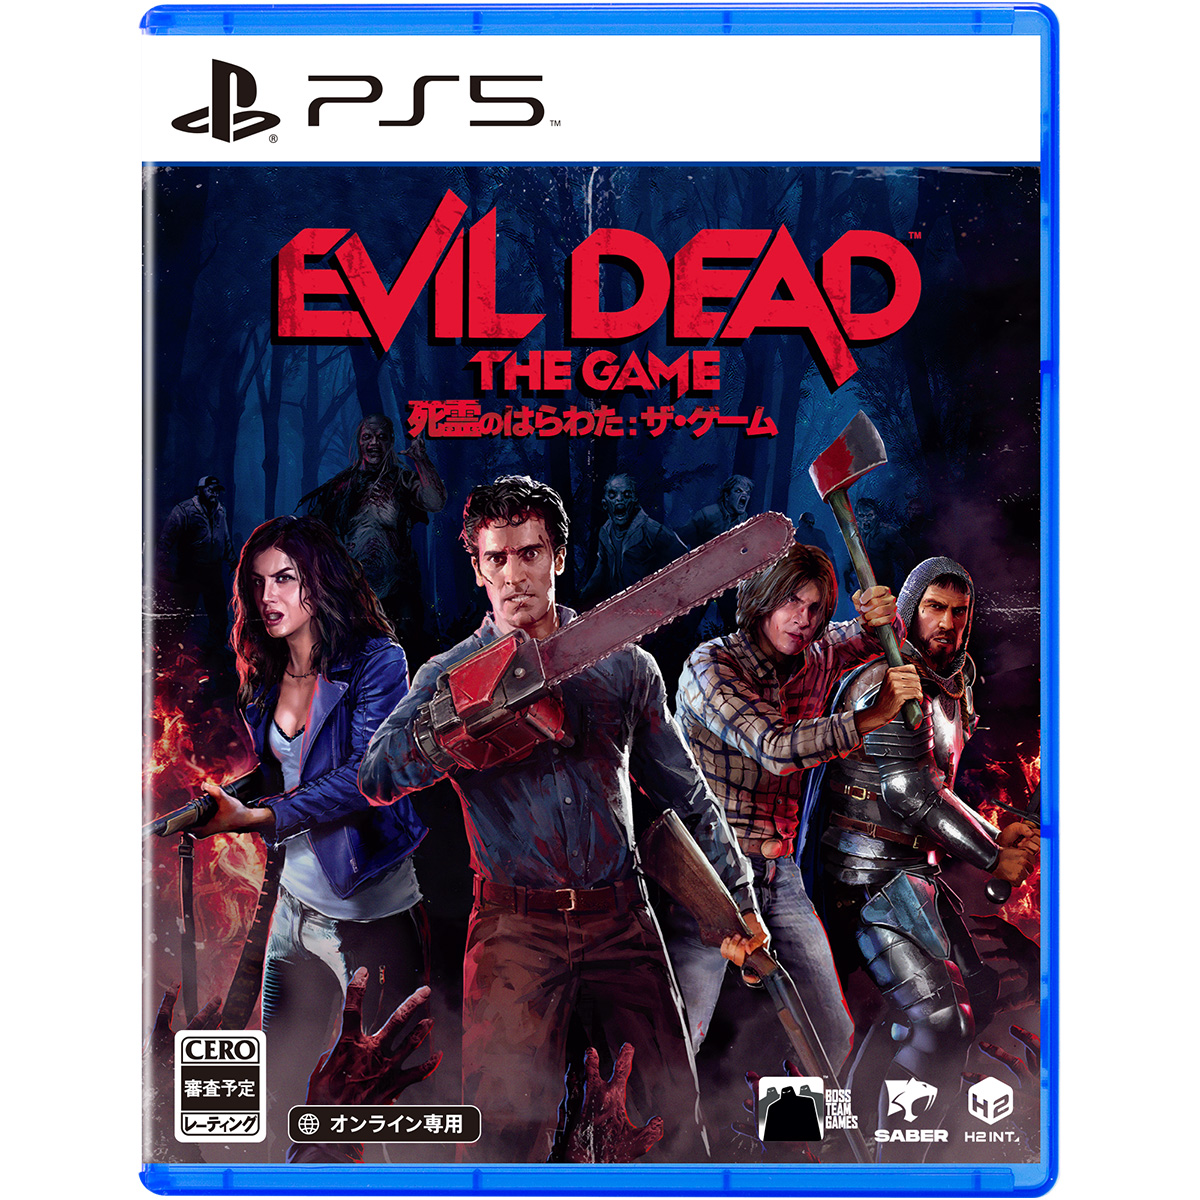 ［PS5］ Evil Dead: The Game（死霊のはらわた: ザ・ゲーム）